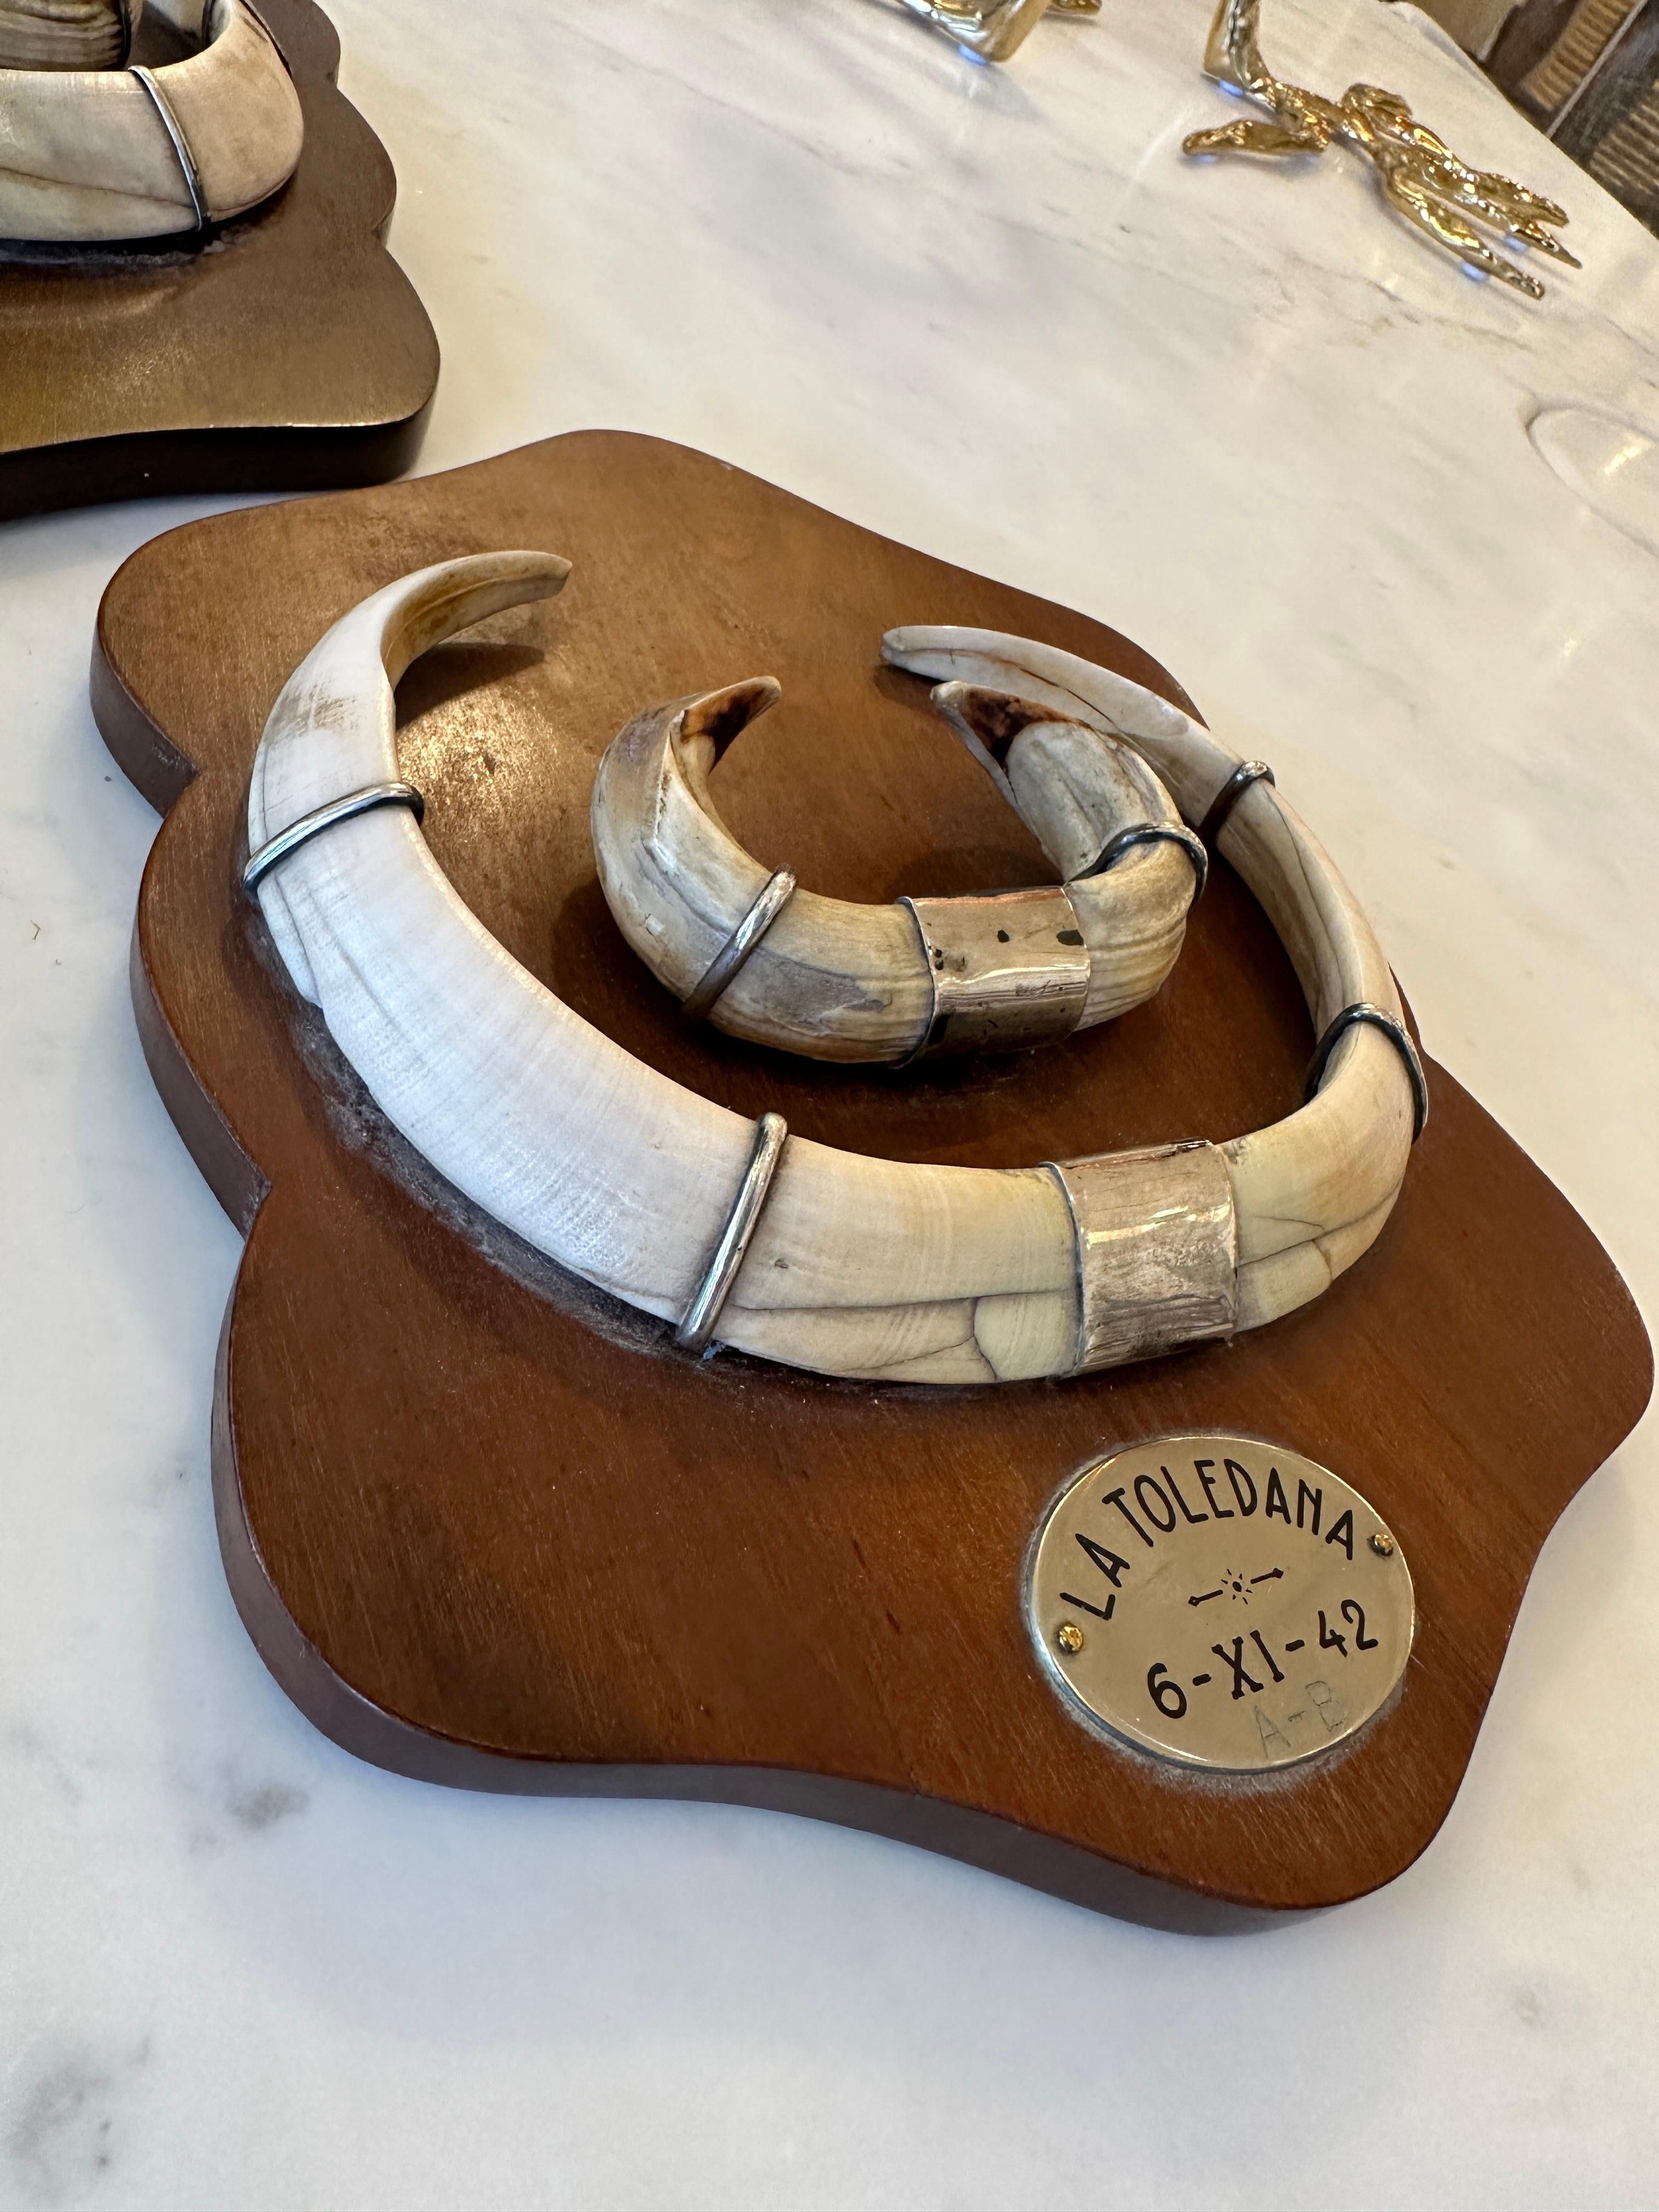 Vintage Wild Boar Tusk Trophies with Sterling Silver Mounting plaques - Set of 3, Spain 1942, 1945, 1946. A vintage trio set of wild boar (Sus scrofa) trophies on wooden plaques. These trophies are mounted with a sterling silver plate depicting the